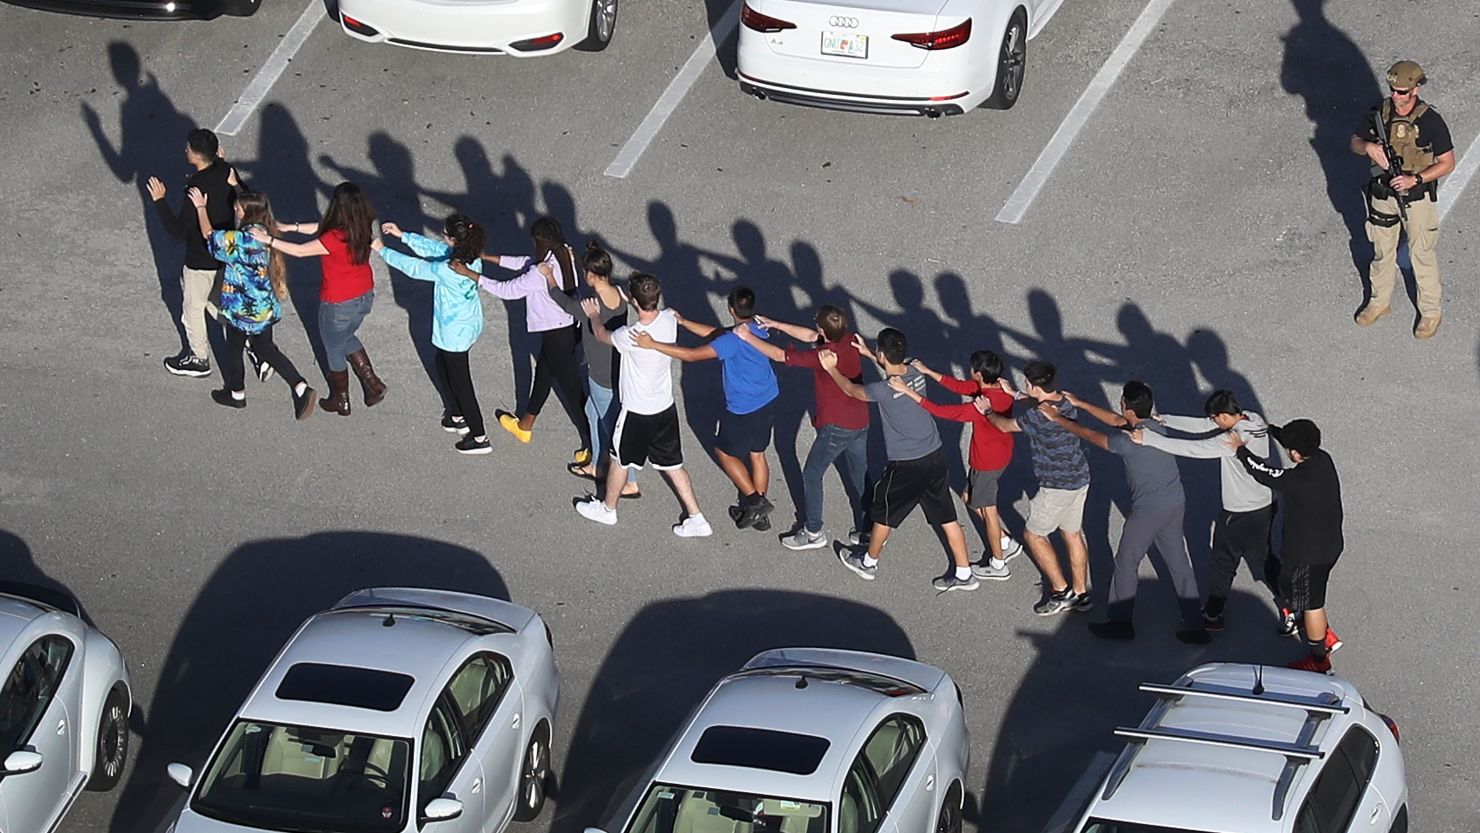 Students file out of Marjory Stoneman Douglas High School after the February 14 shooting.